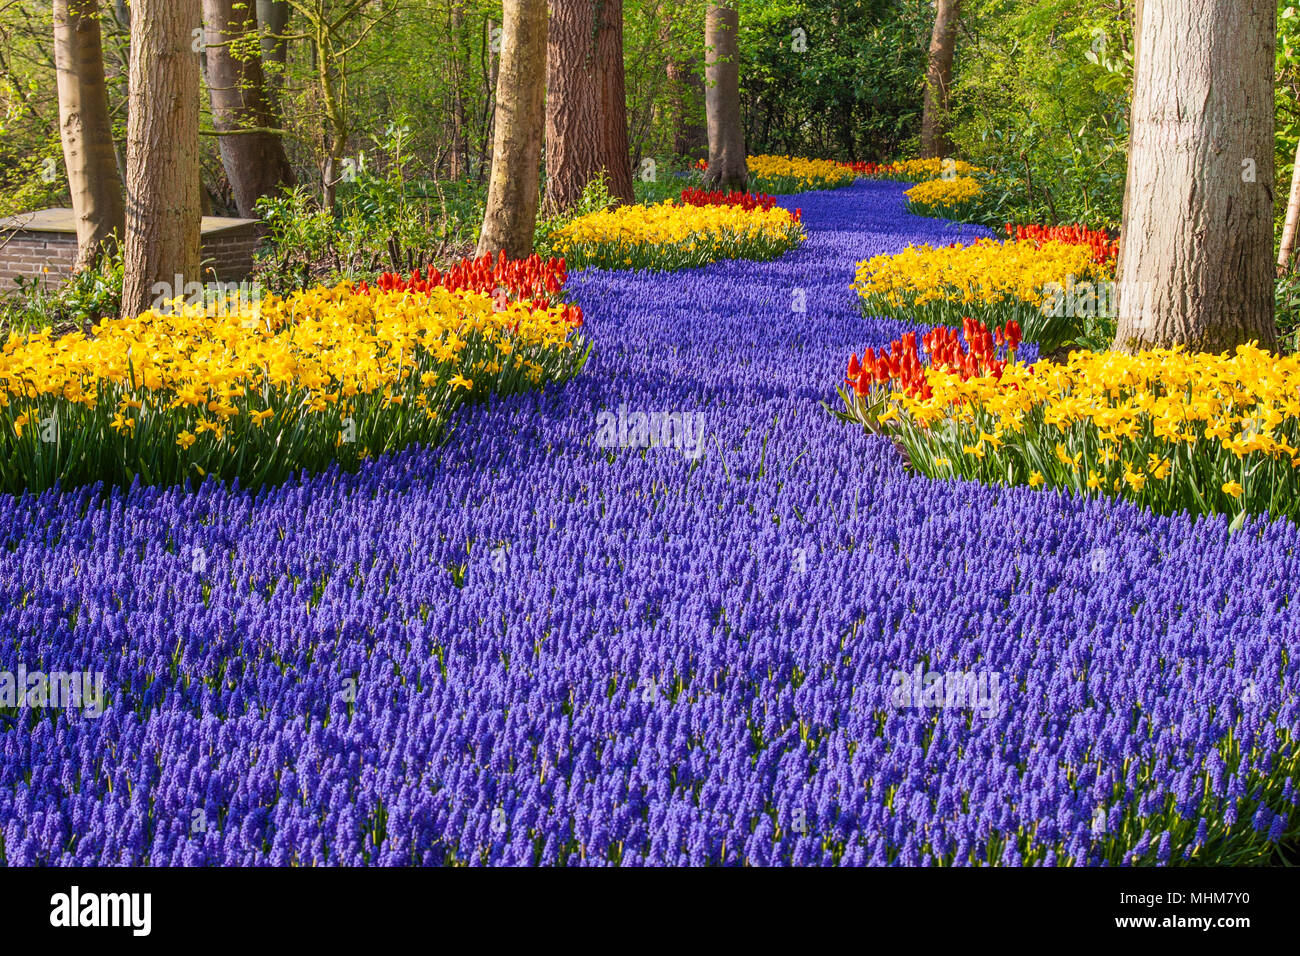 Garden scene with Muscari, Daffodils, and Tulips at Keukenhof Gardens in South Holland in The Netherlands. Stock Photo